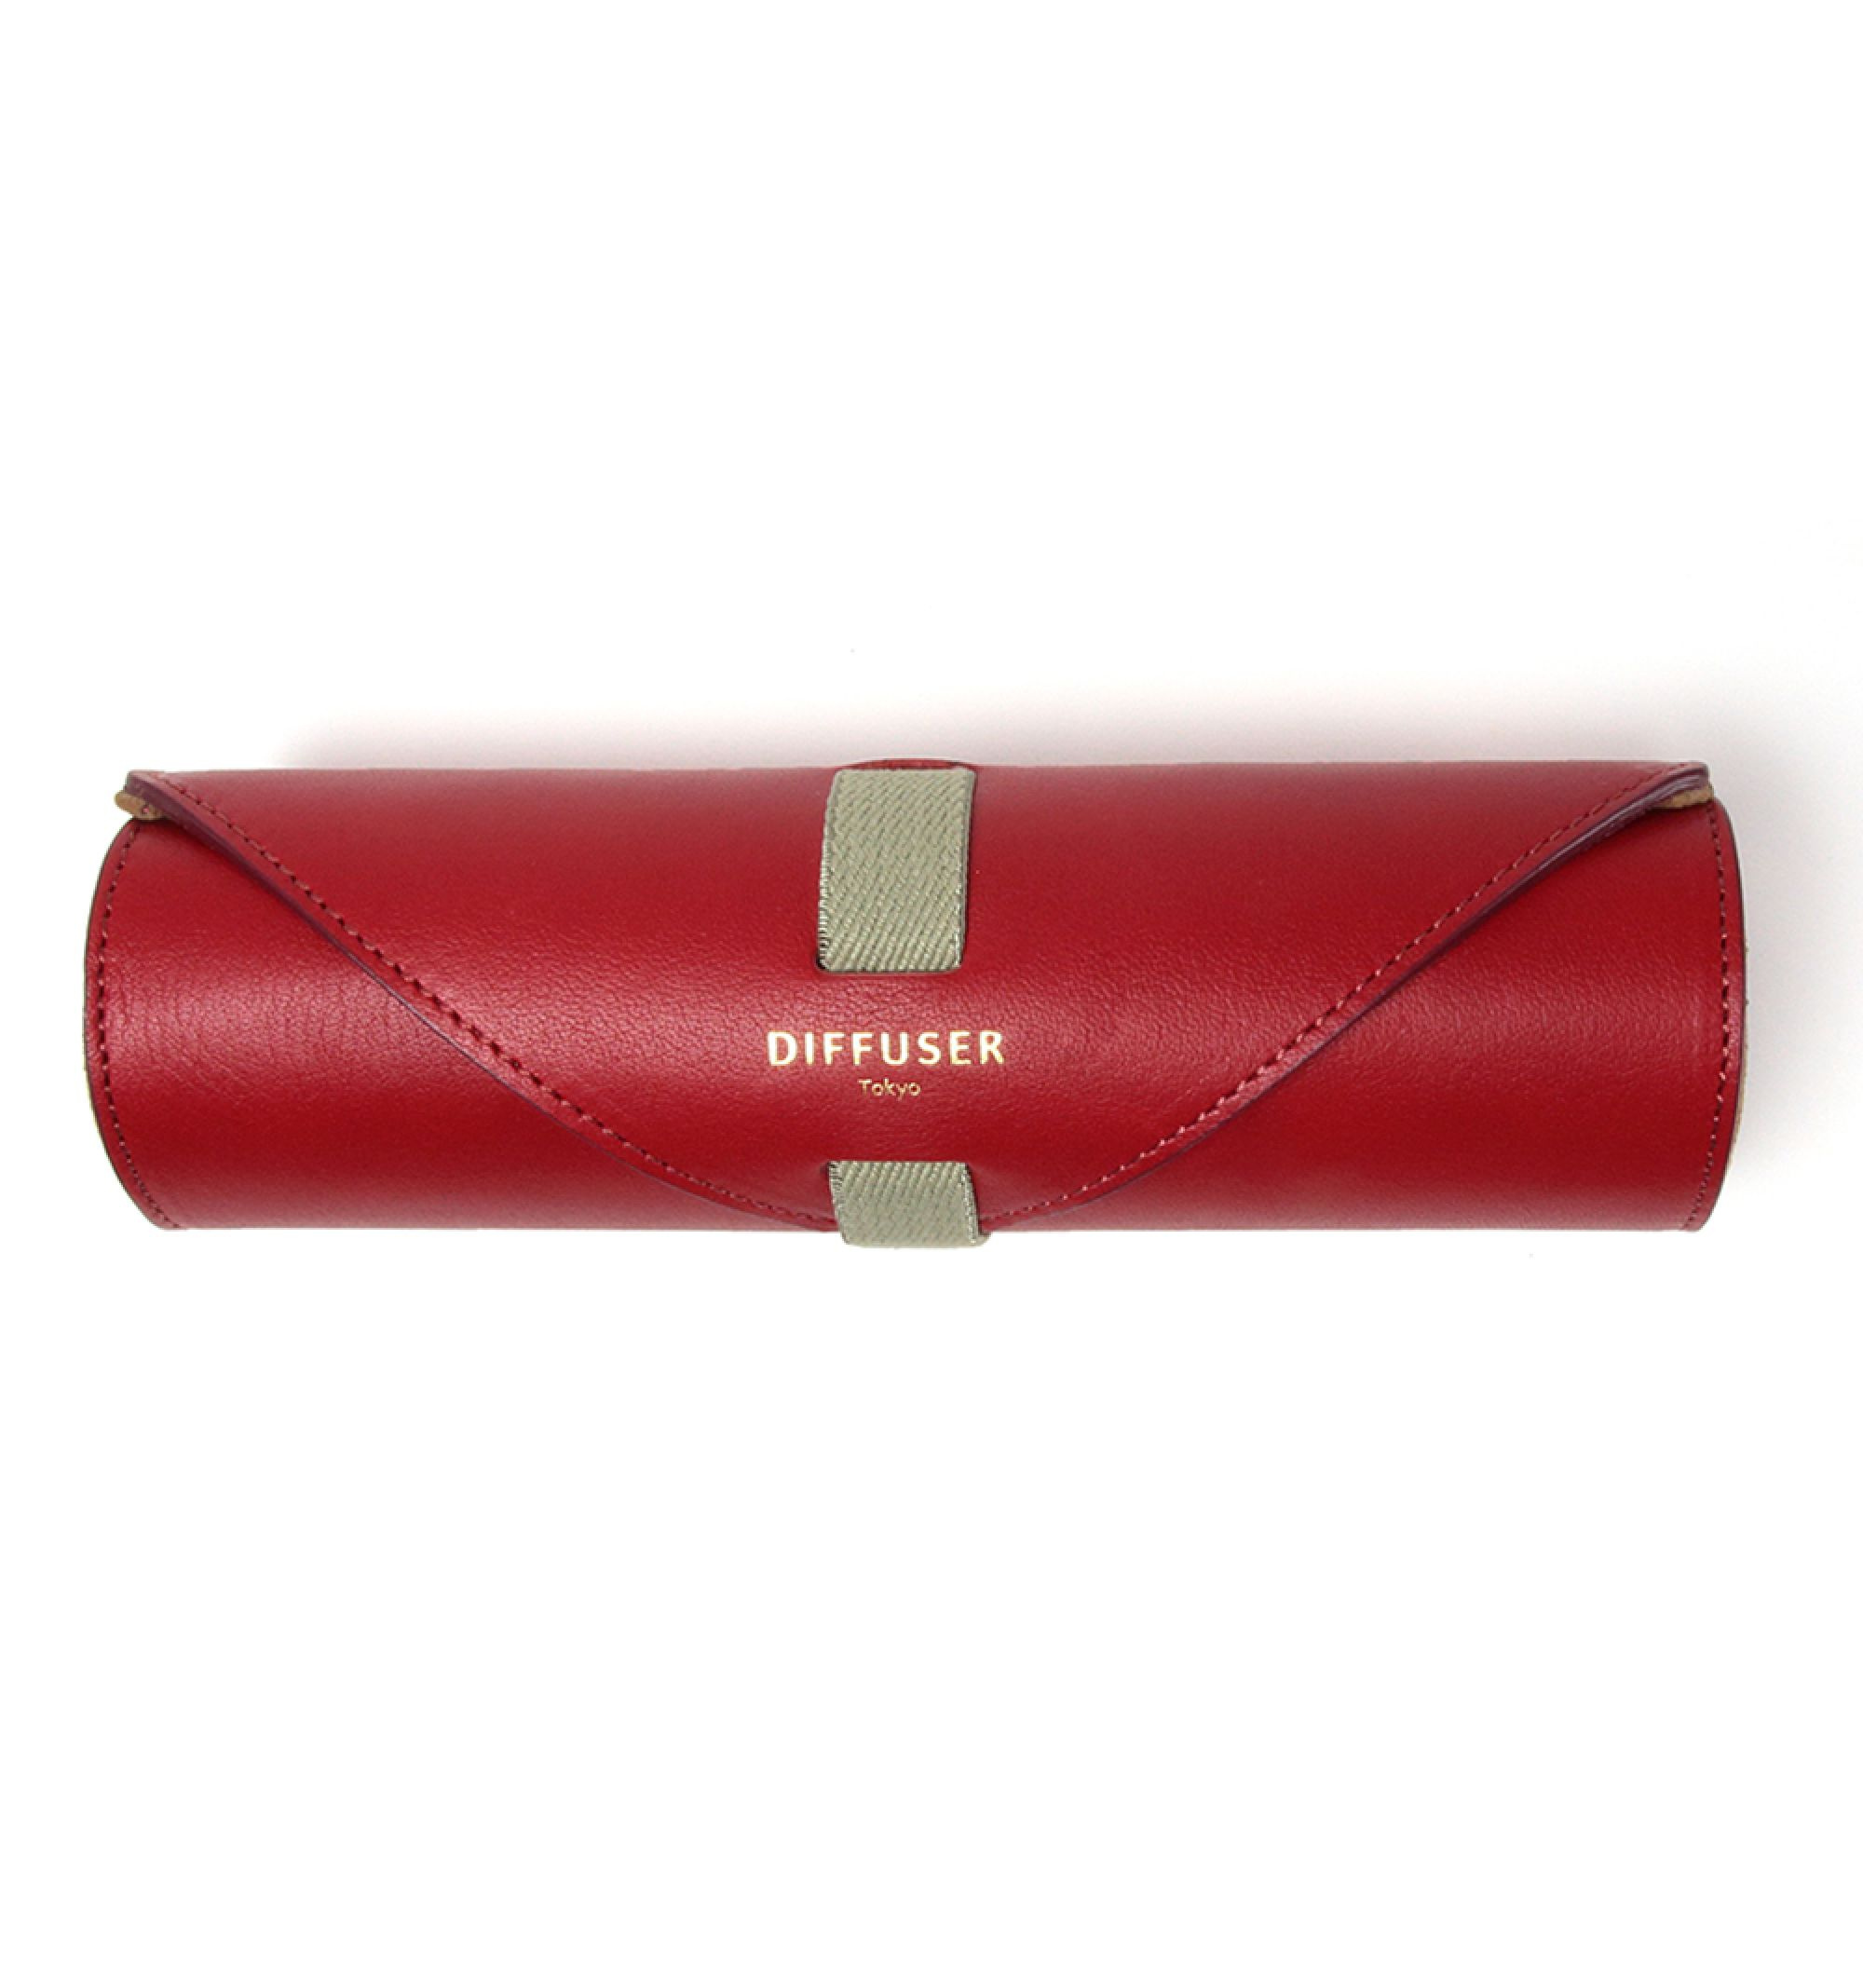 DIFFUSER TOKYO / OIL LEATHER ROLL EYEWEAR CASE / RED & LEIGHT BROWN